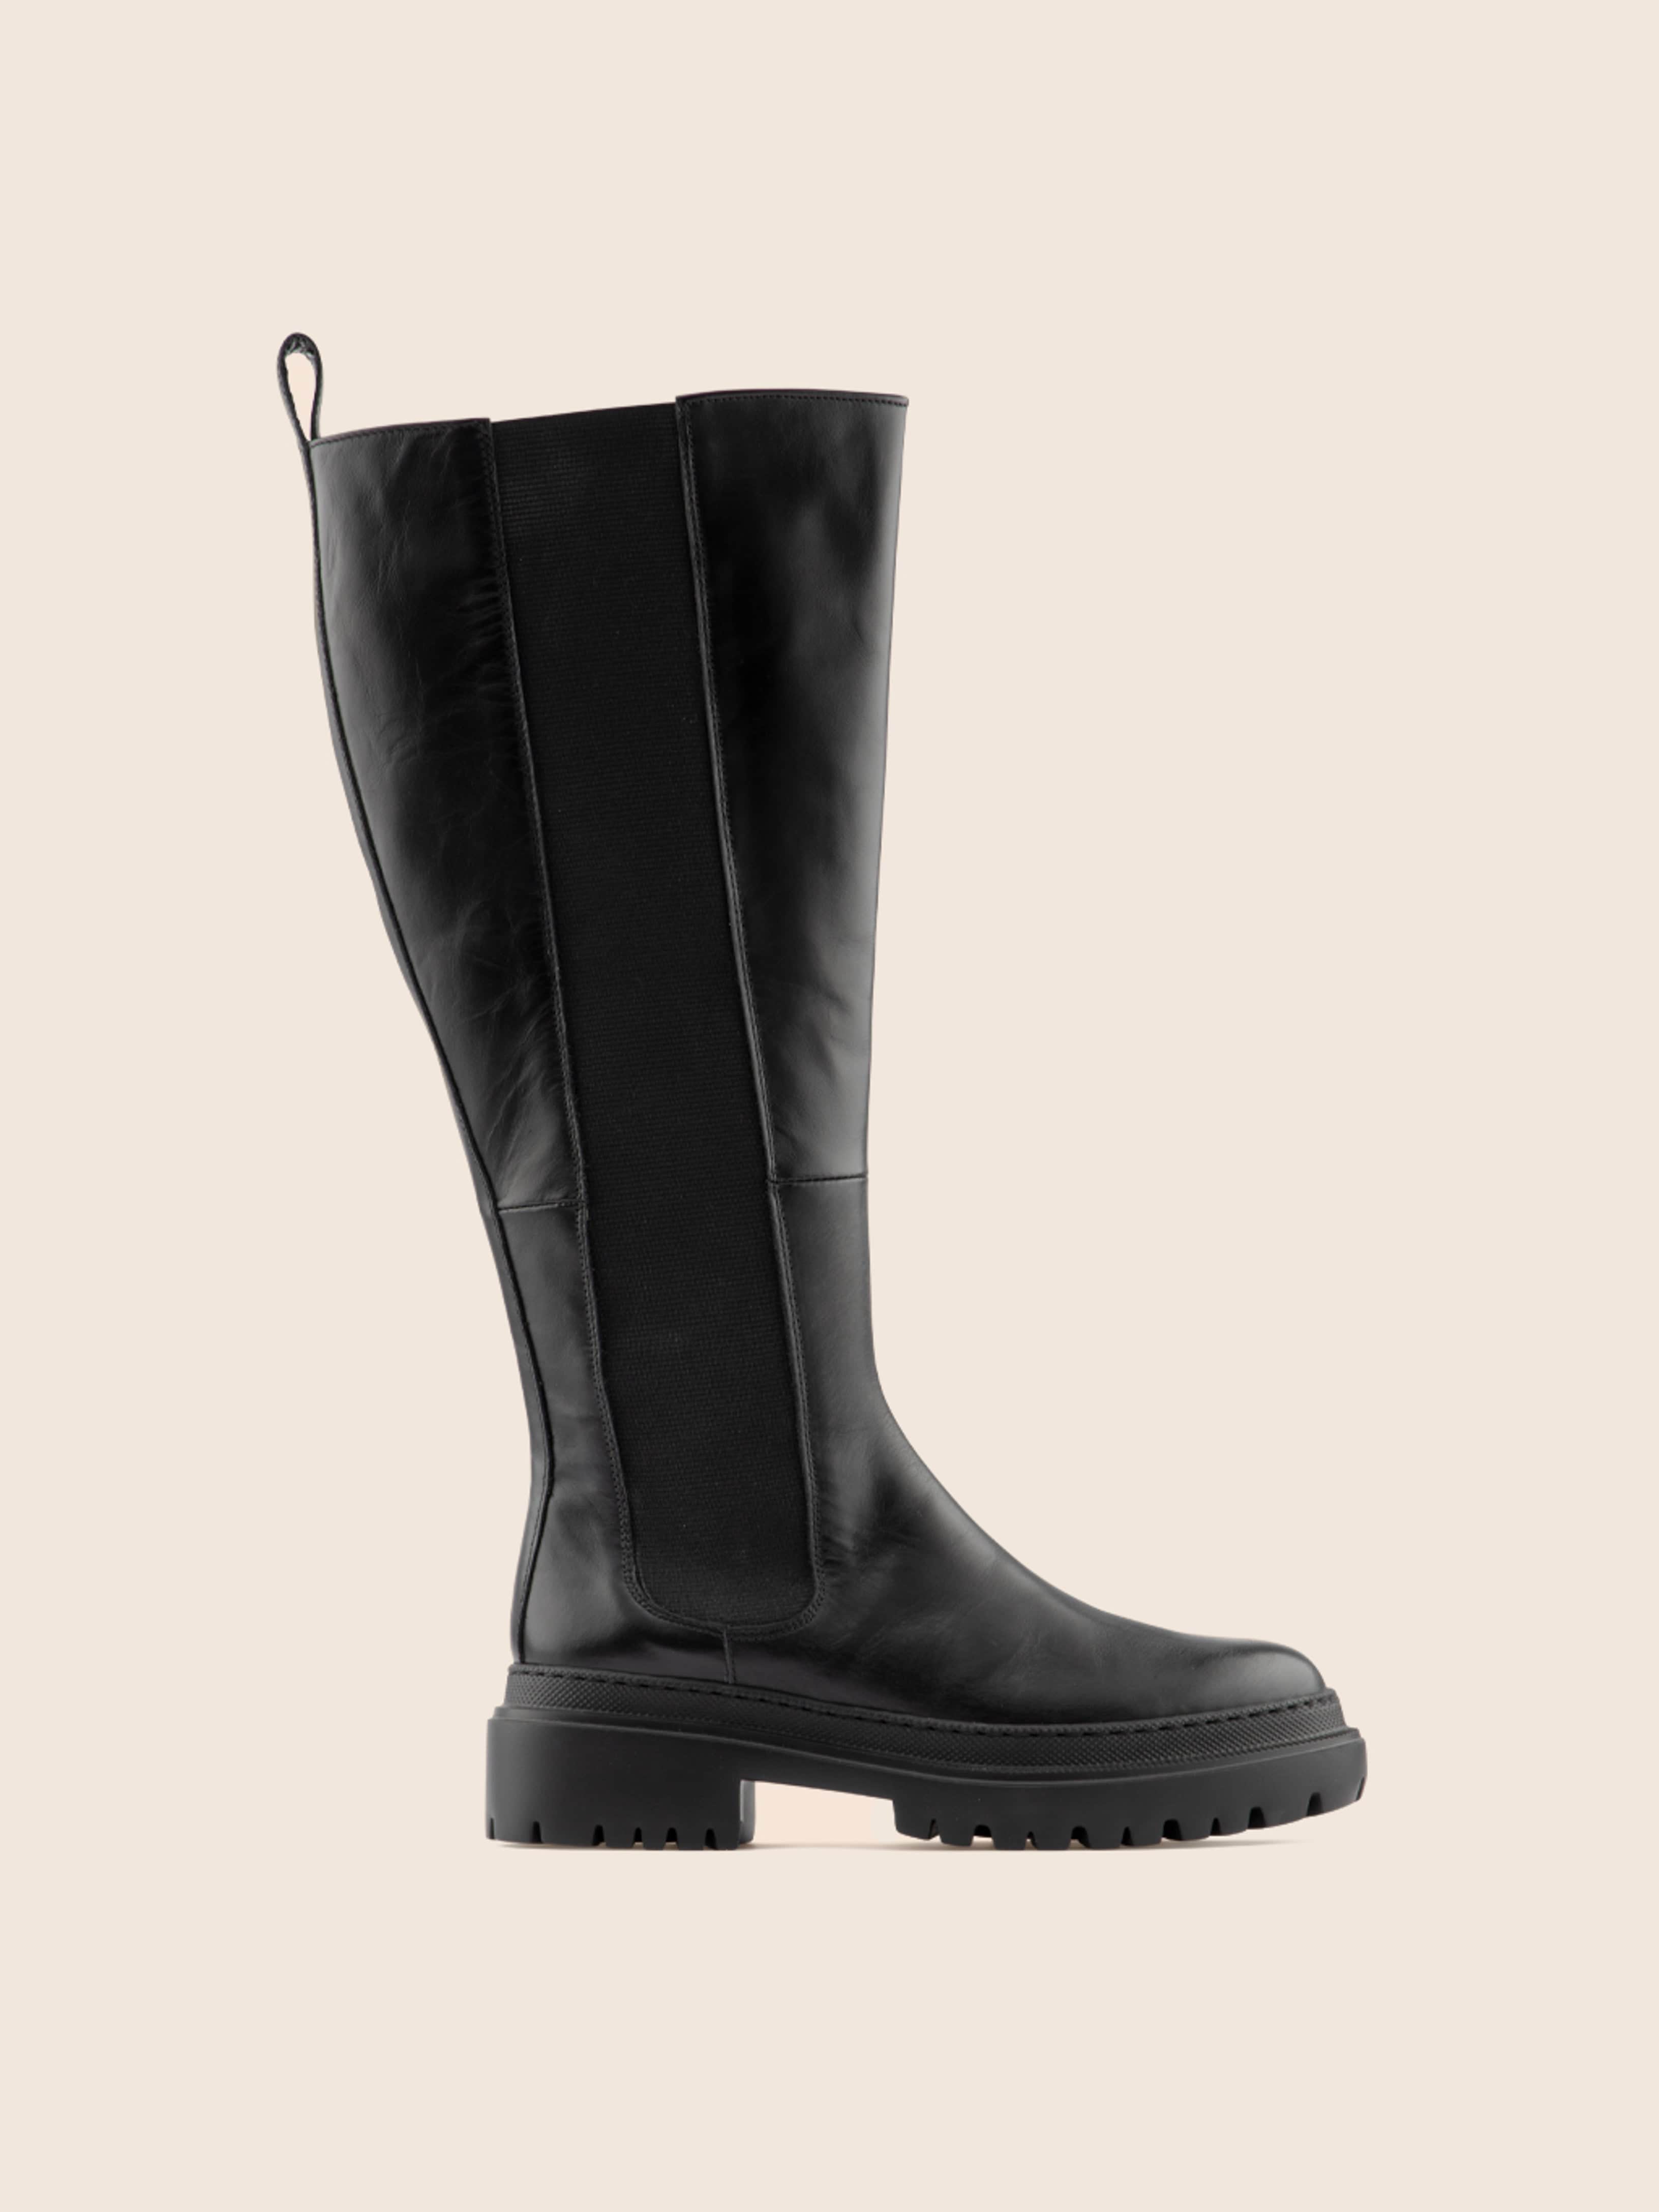 Women's High Boots | Handmade in Leather | Maguire Shoes